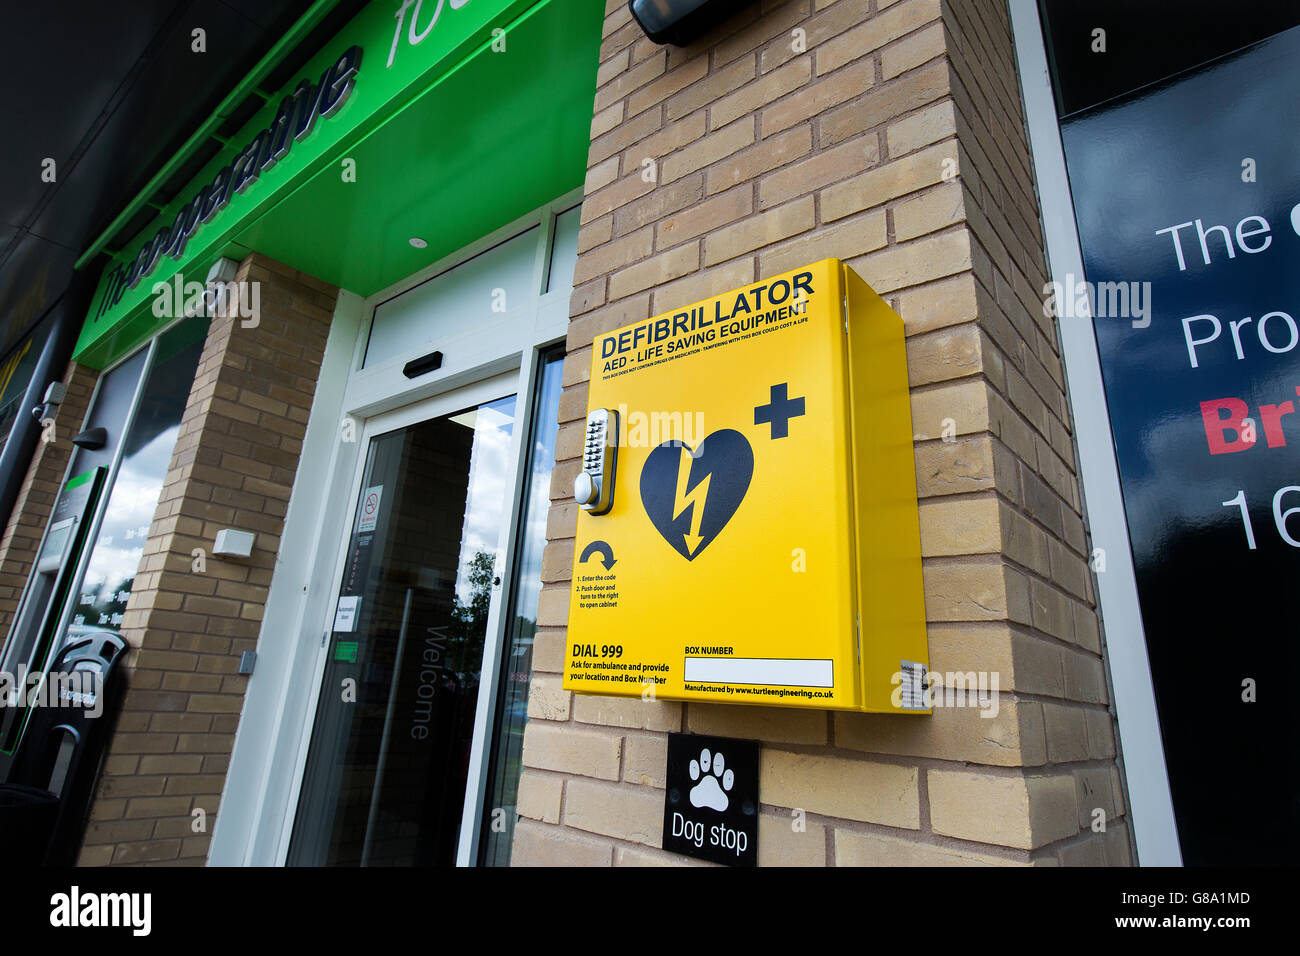 Medical Defibrillator outside a Co-operative Food Store in Nottingham, UK Stock Photo